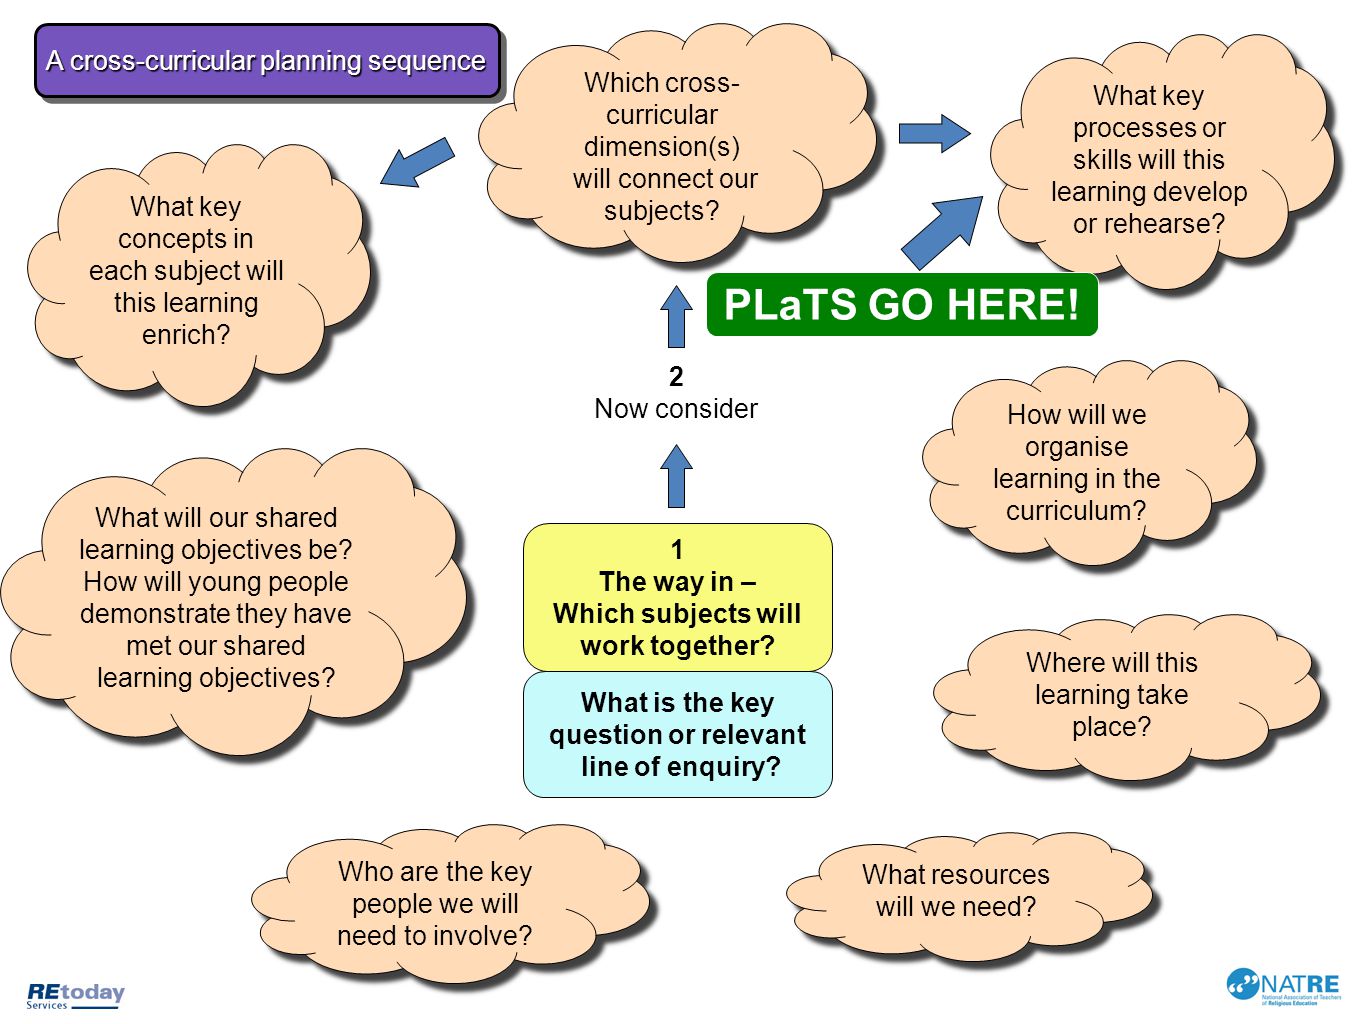 PLaTS GO HERE! A cross-curricular planning sequence